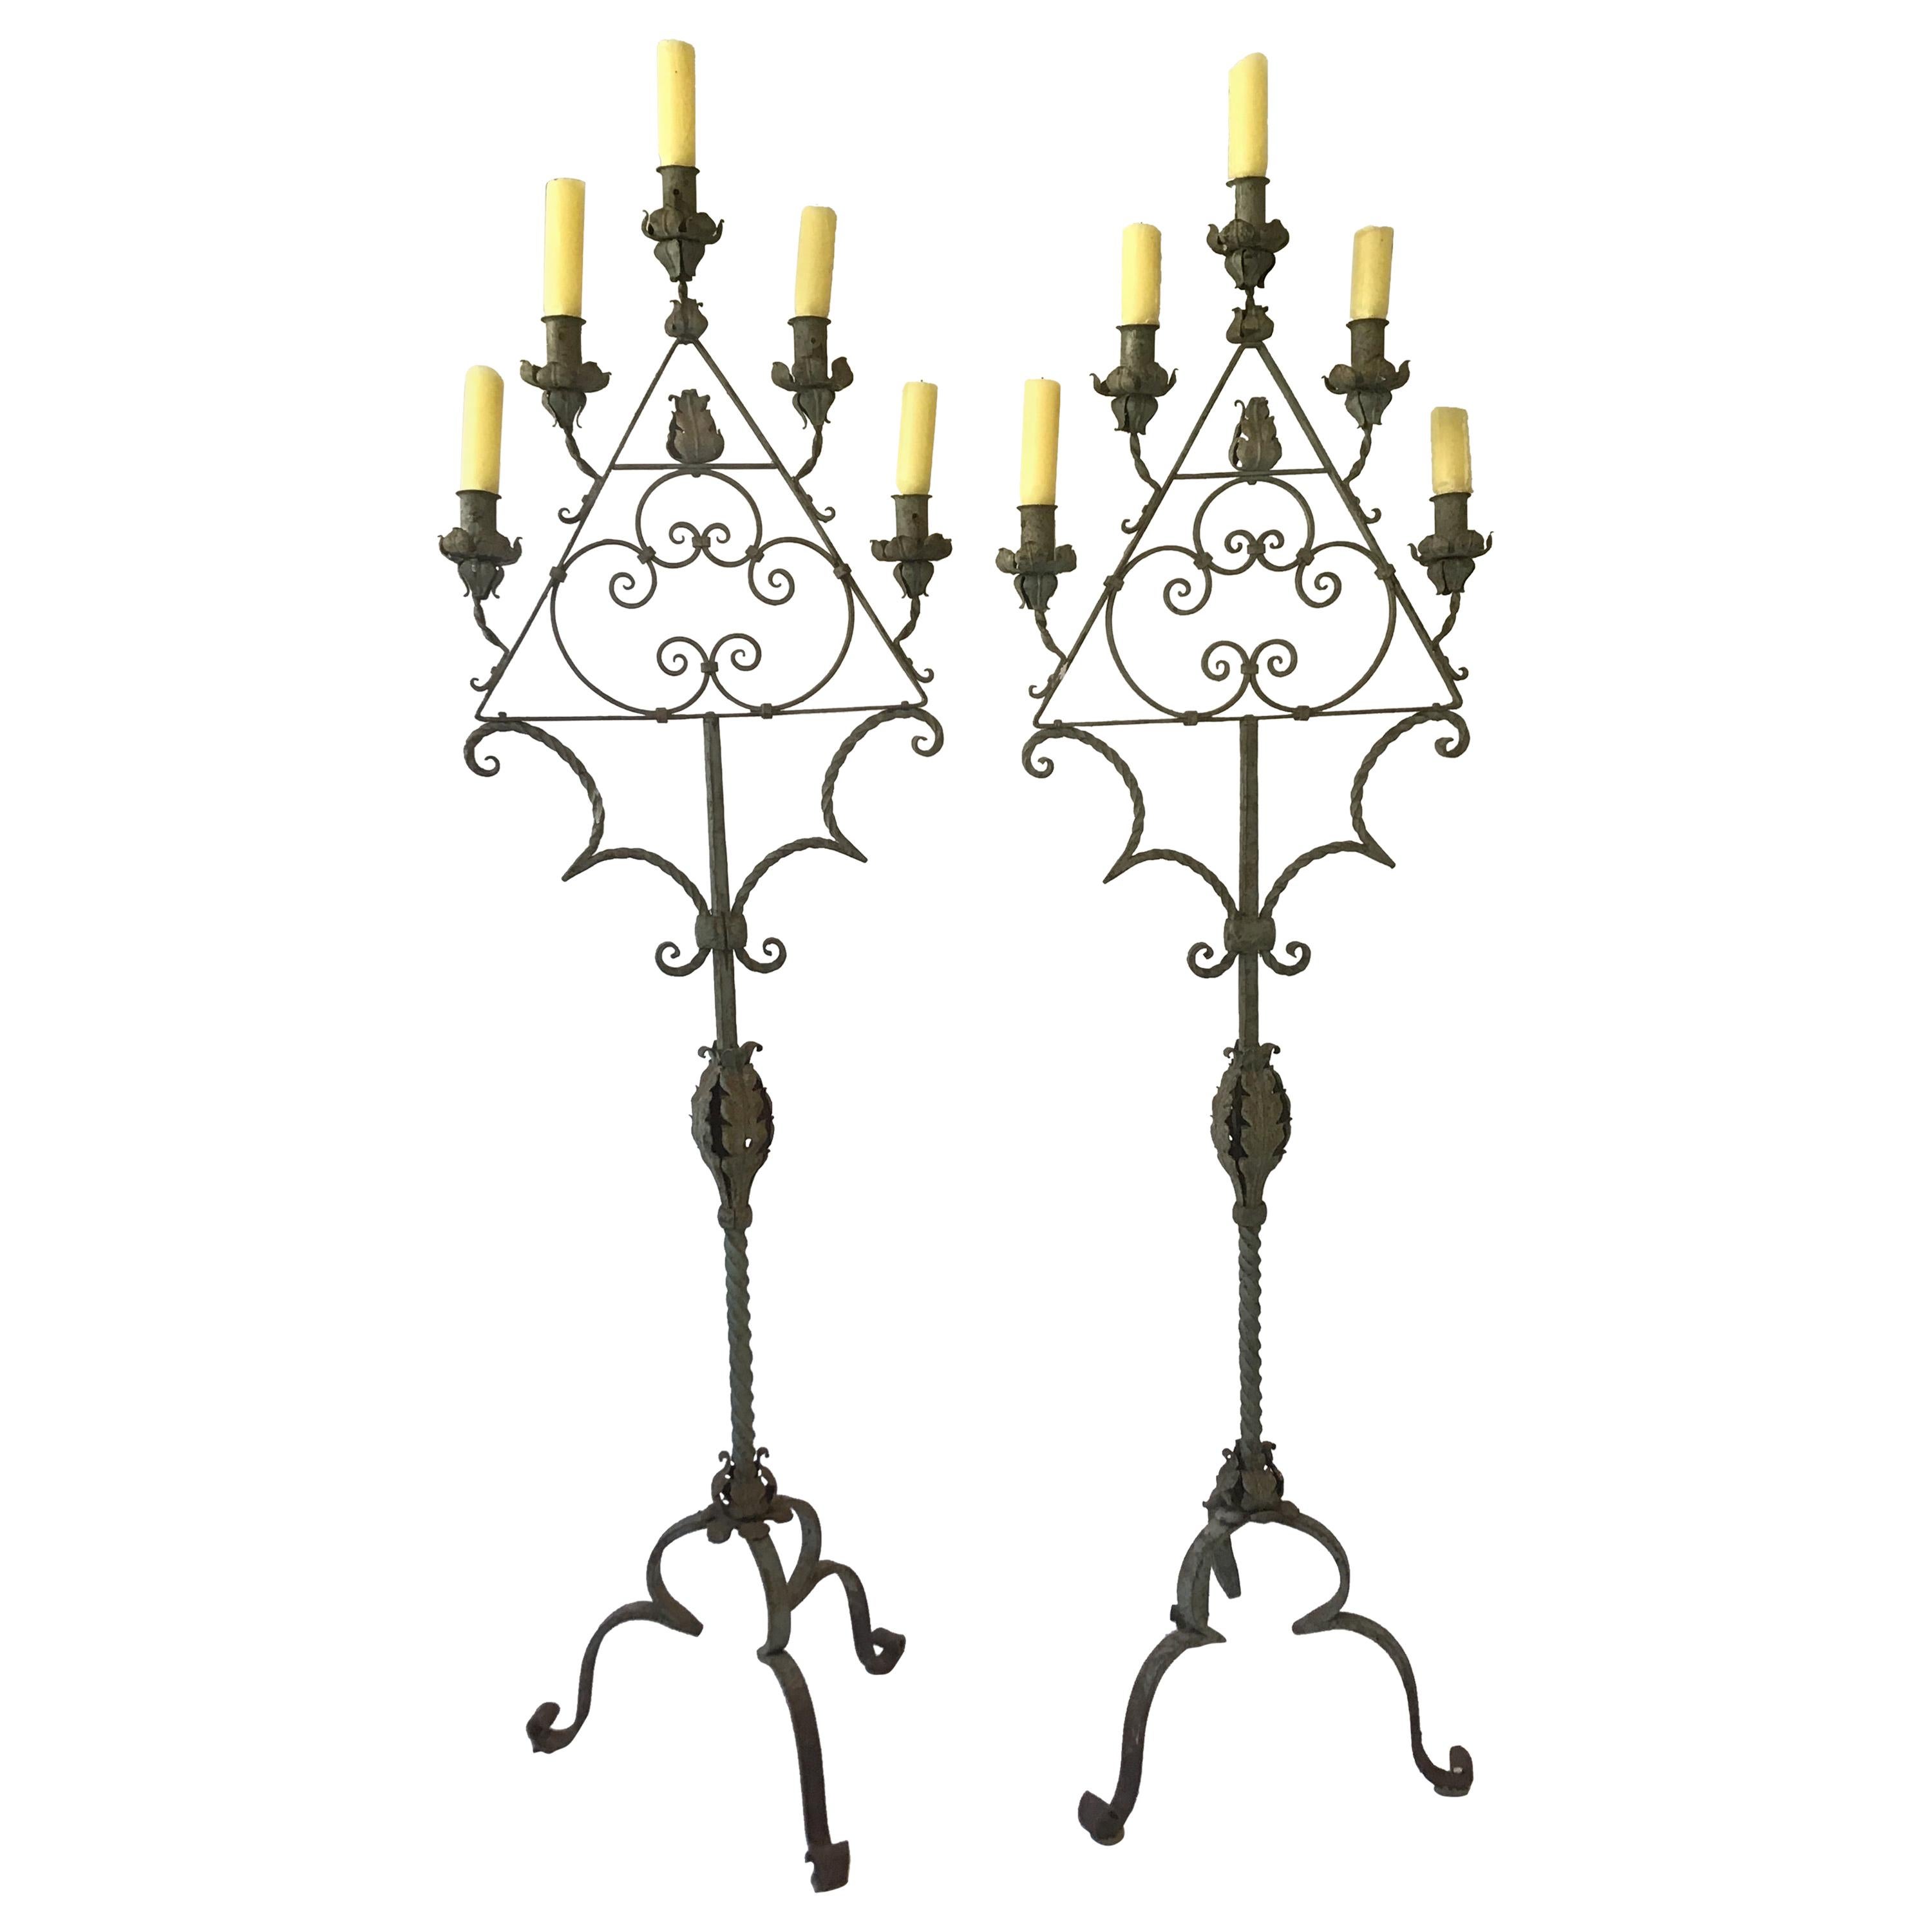 Pair of Gothic 1920s Wrought Iron Candelabras